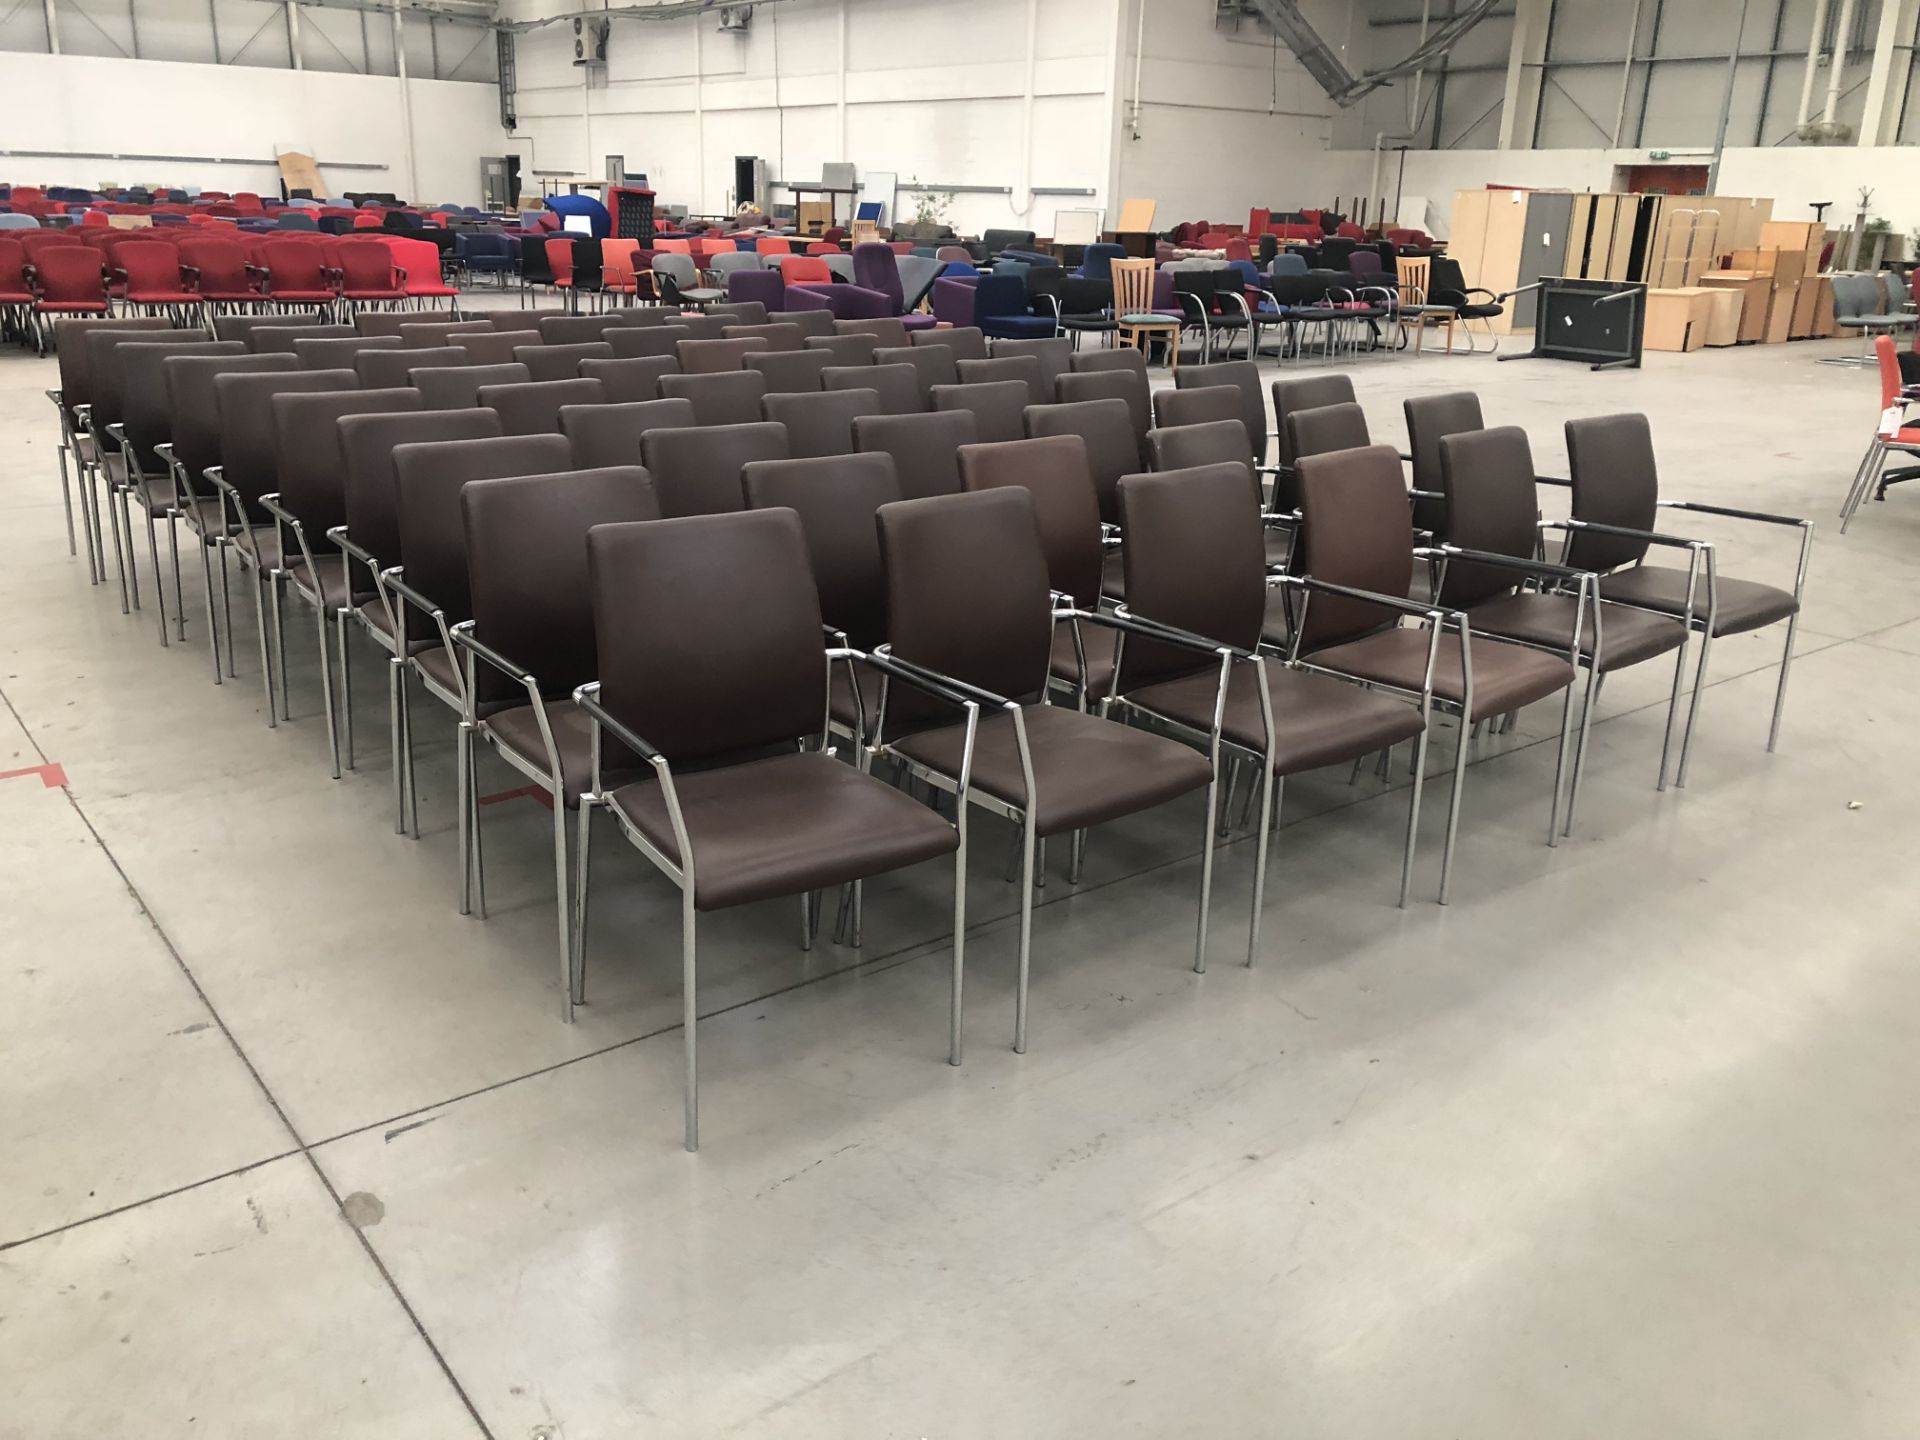 60 x Faux leather chairs with metal legs and arms